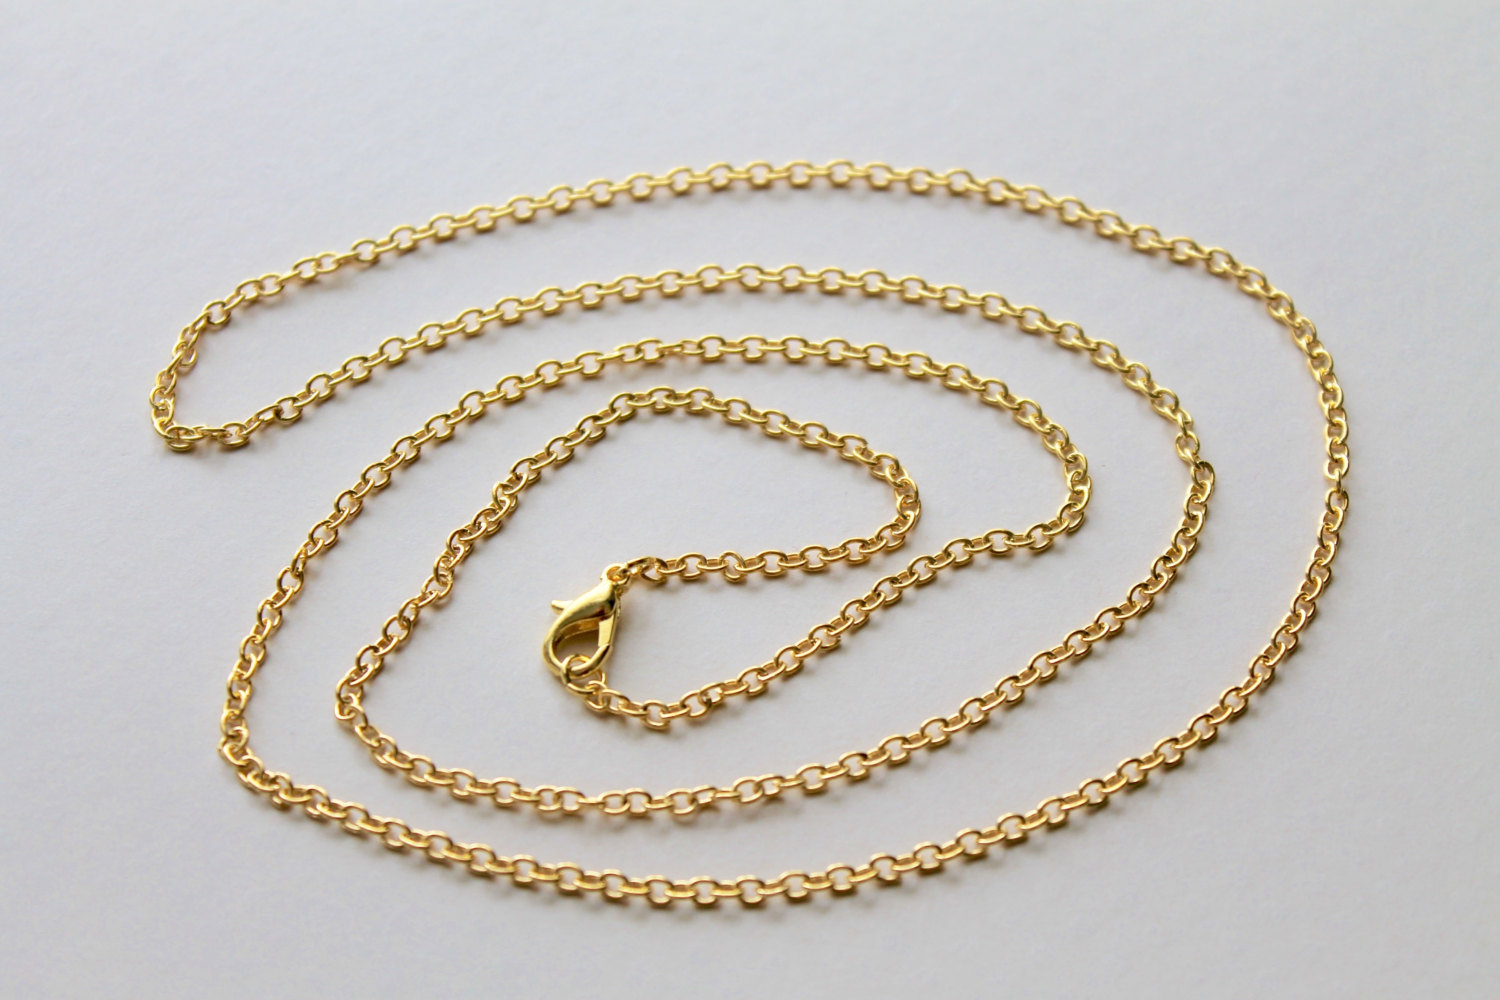 jewelry chain wholesale gold plated chains / finished cable link chains / lobster clasp FHEABZW